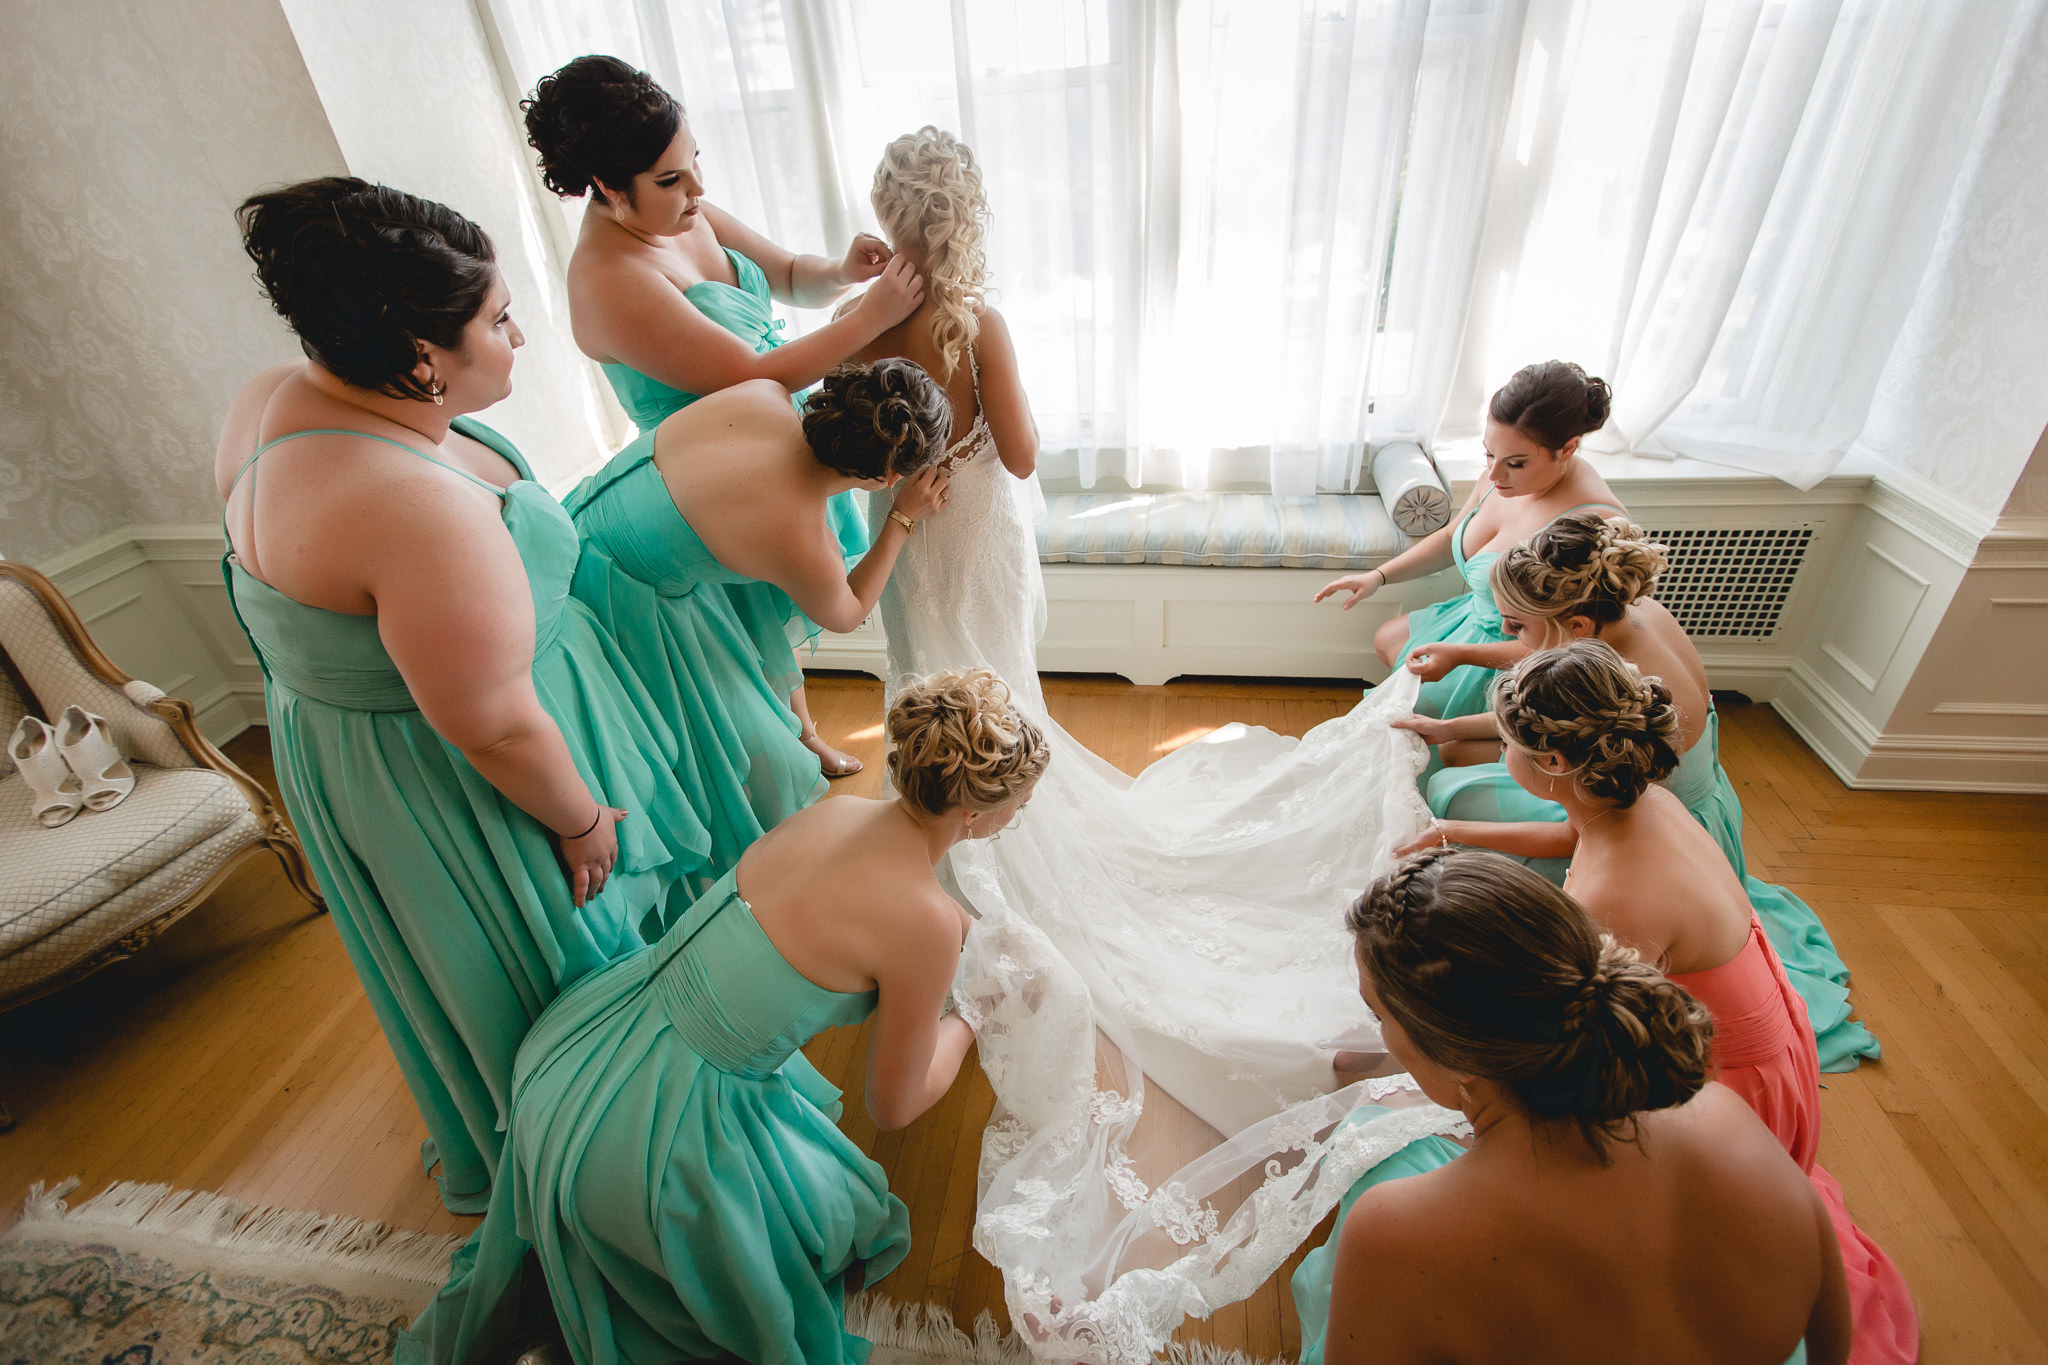 Bridesmaids help the bride put finishing touches on her wedding dress